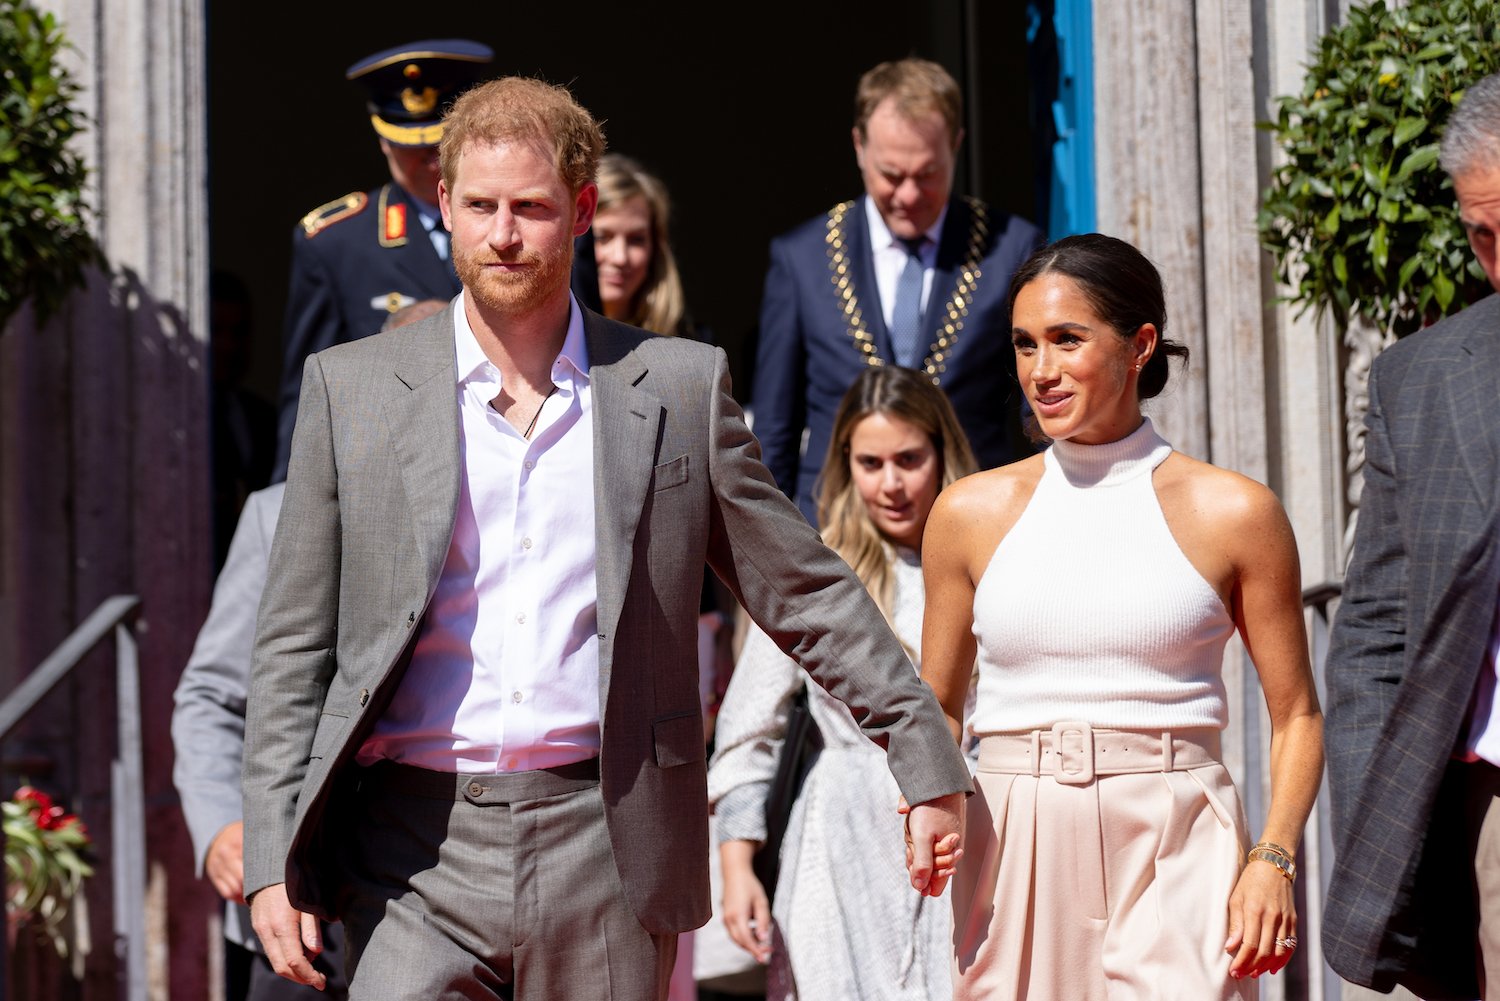 Prince Harry body language appears tense and nervous alongside Meghan Markle at Invictus Games event